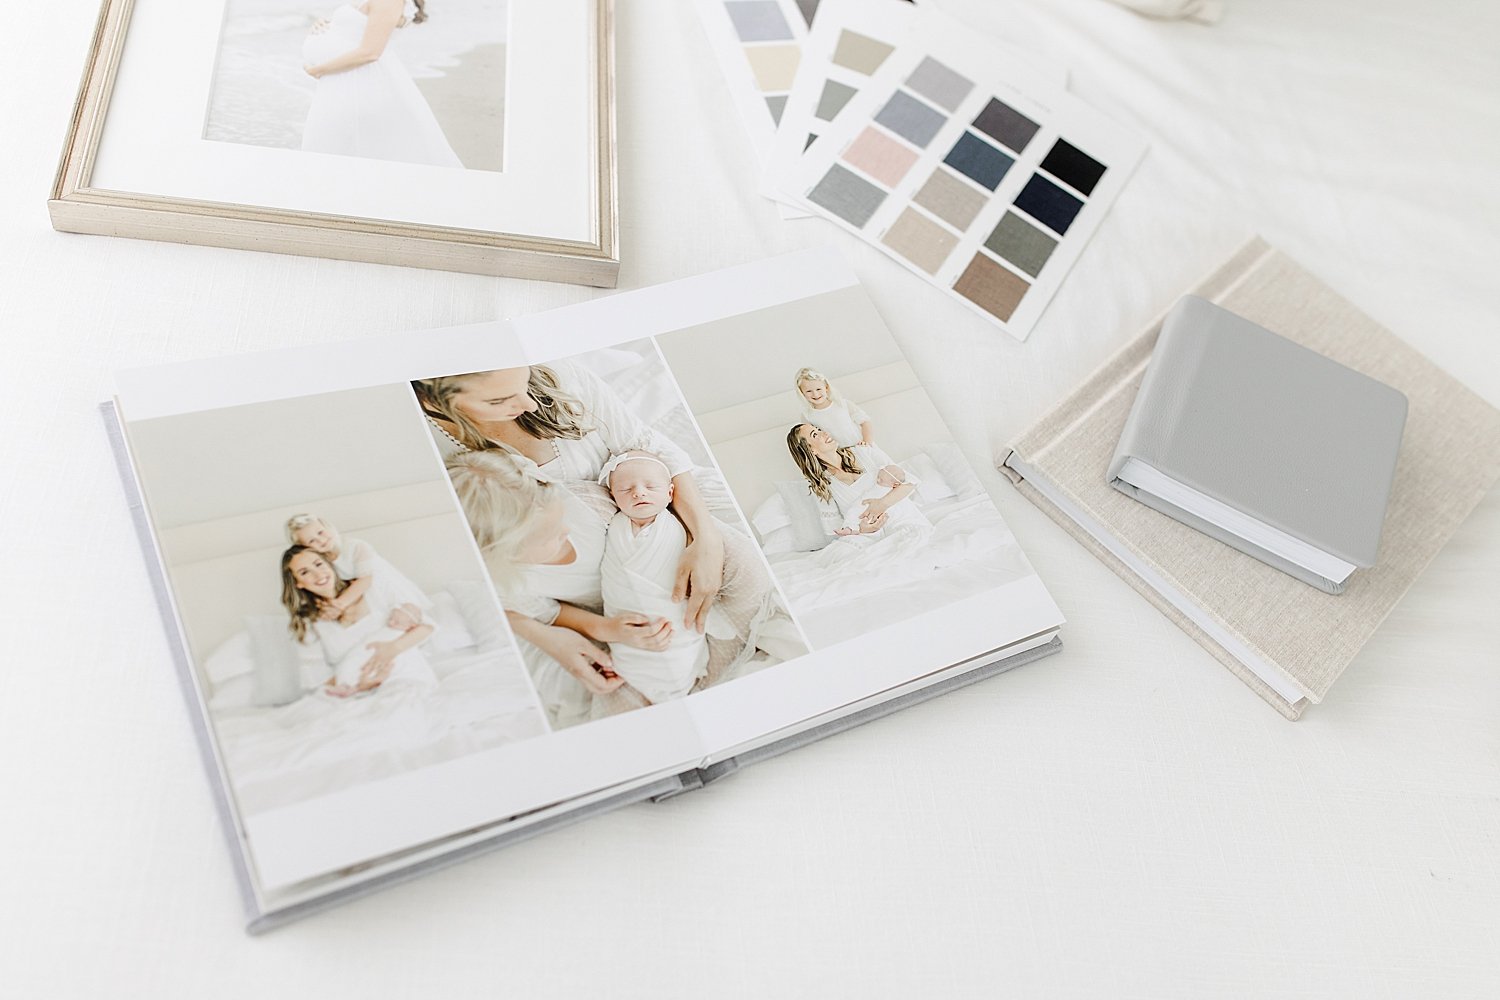 Custom-designed heirloom albums by CT Newborn and Family Photographer, Kristin Wood Photography.